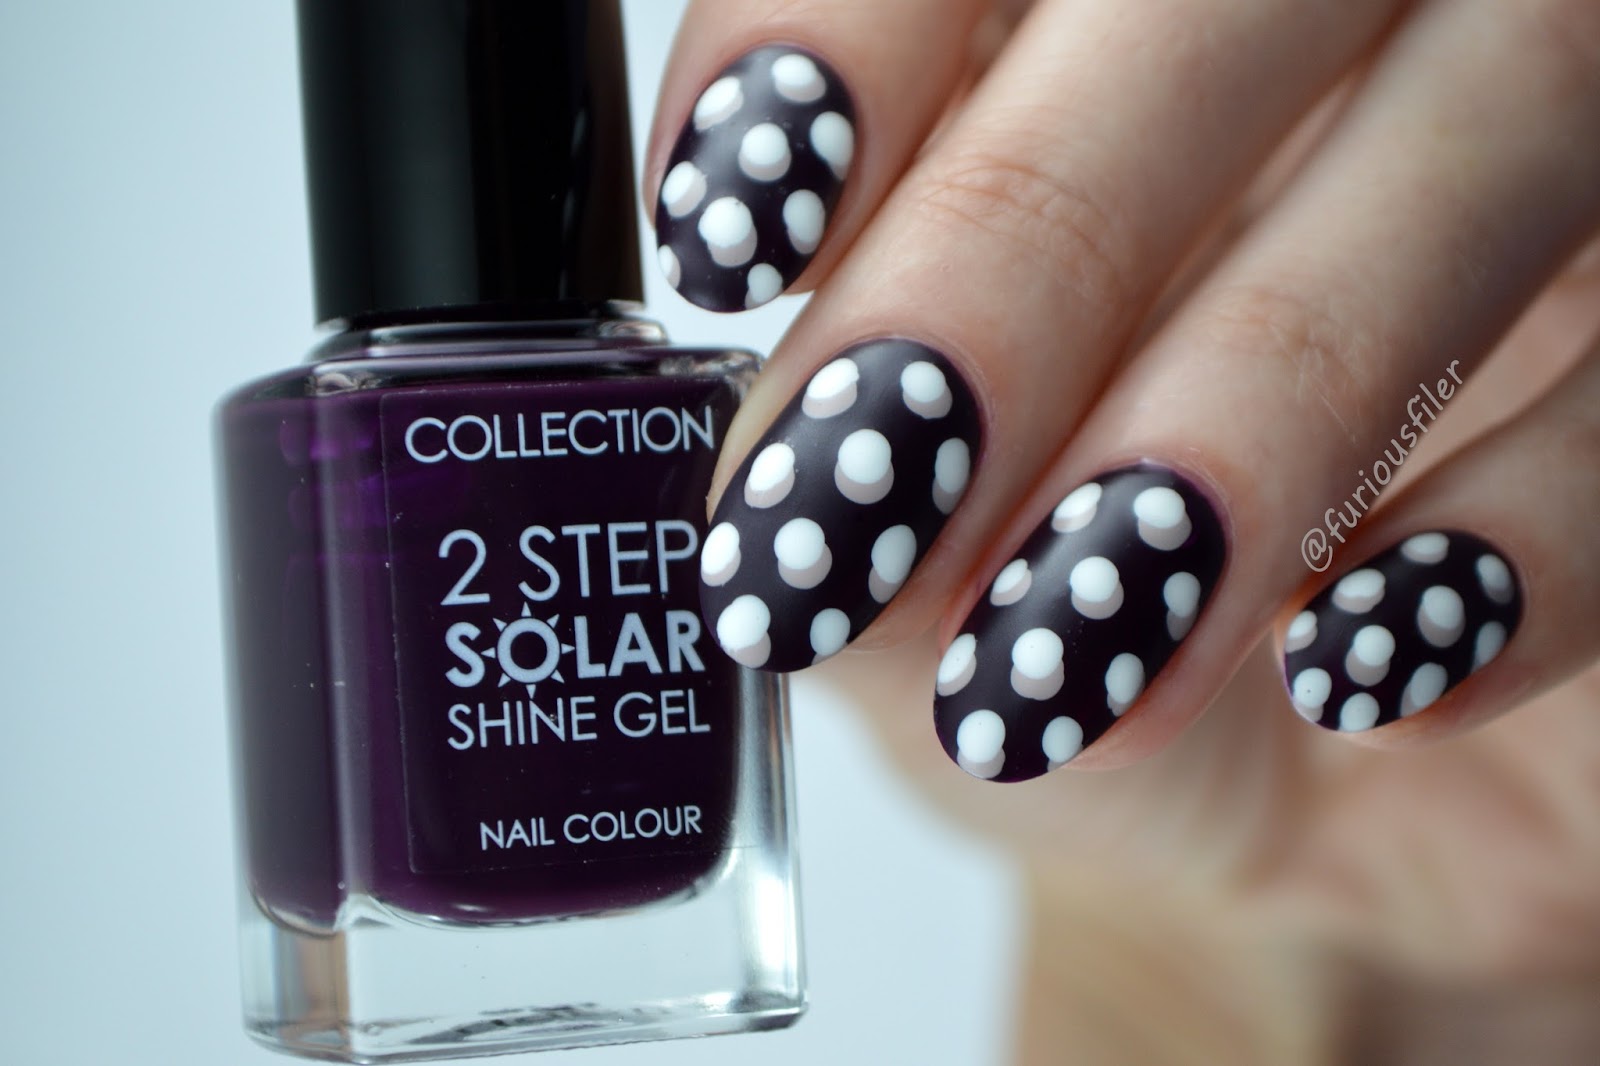 DIY | Try This Cute Polka Dot Nail Art Design For An Exciting Summer